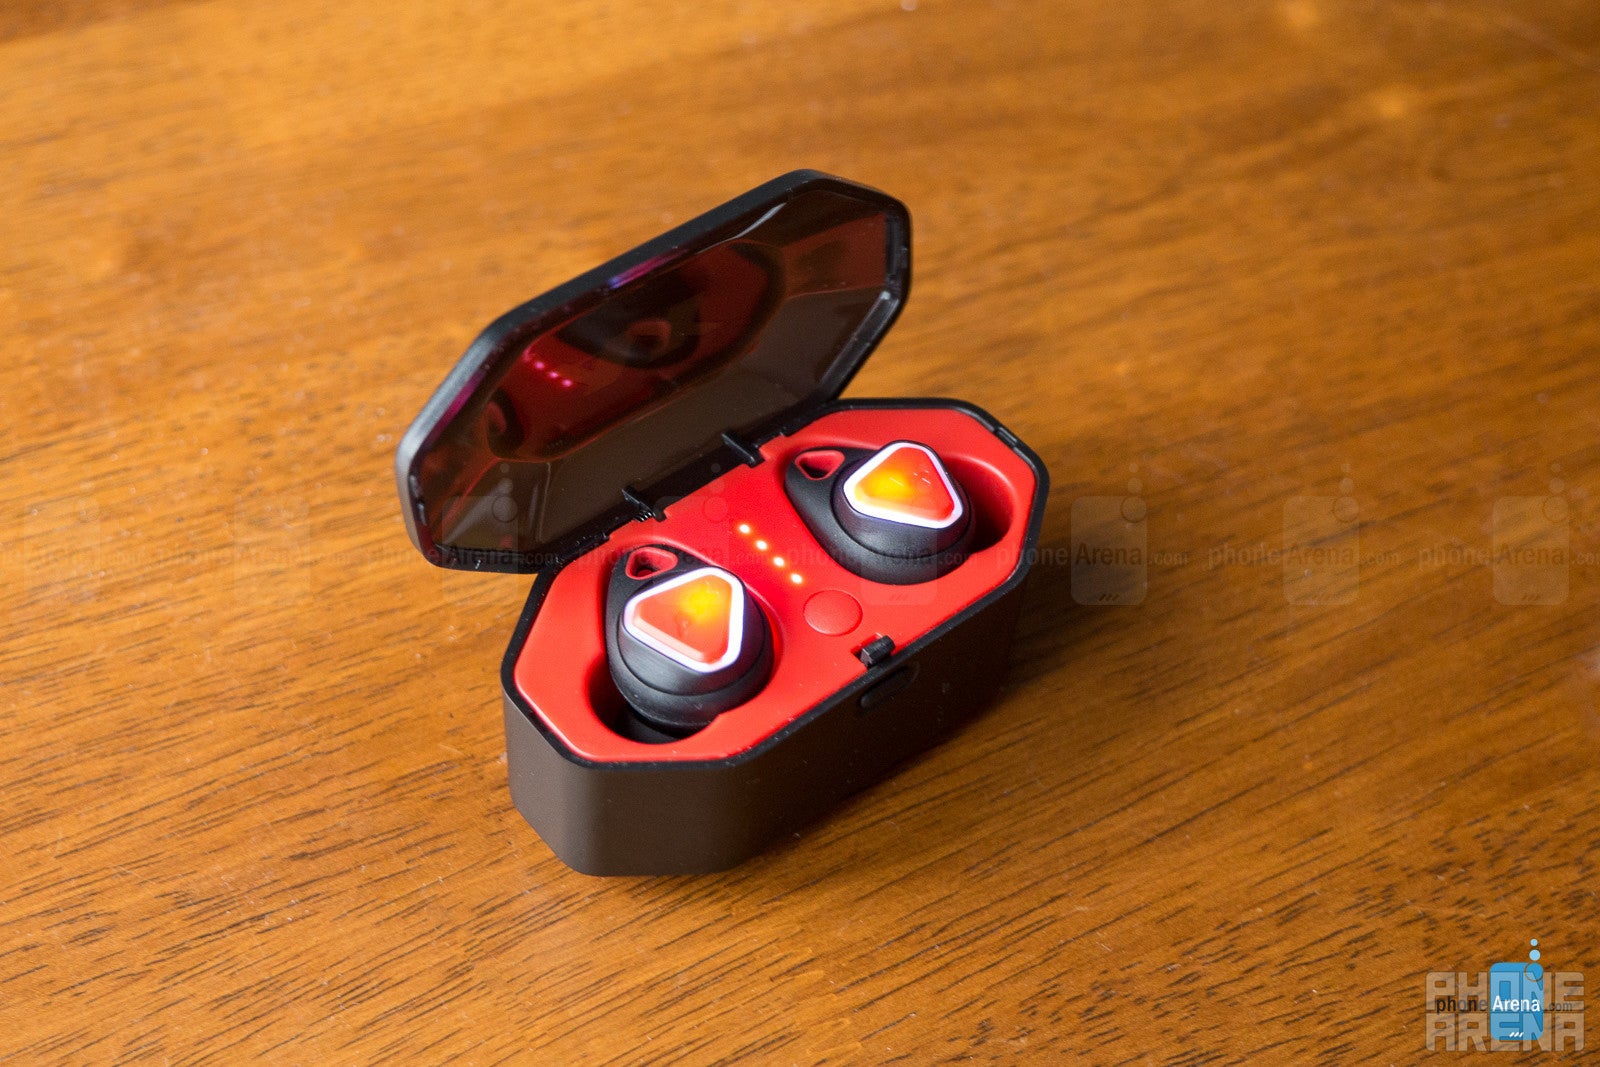 AxumGear Sports Earbuds Review